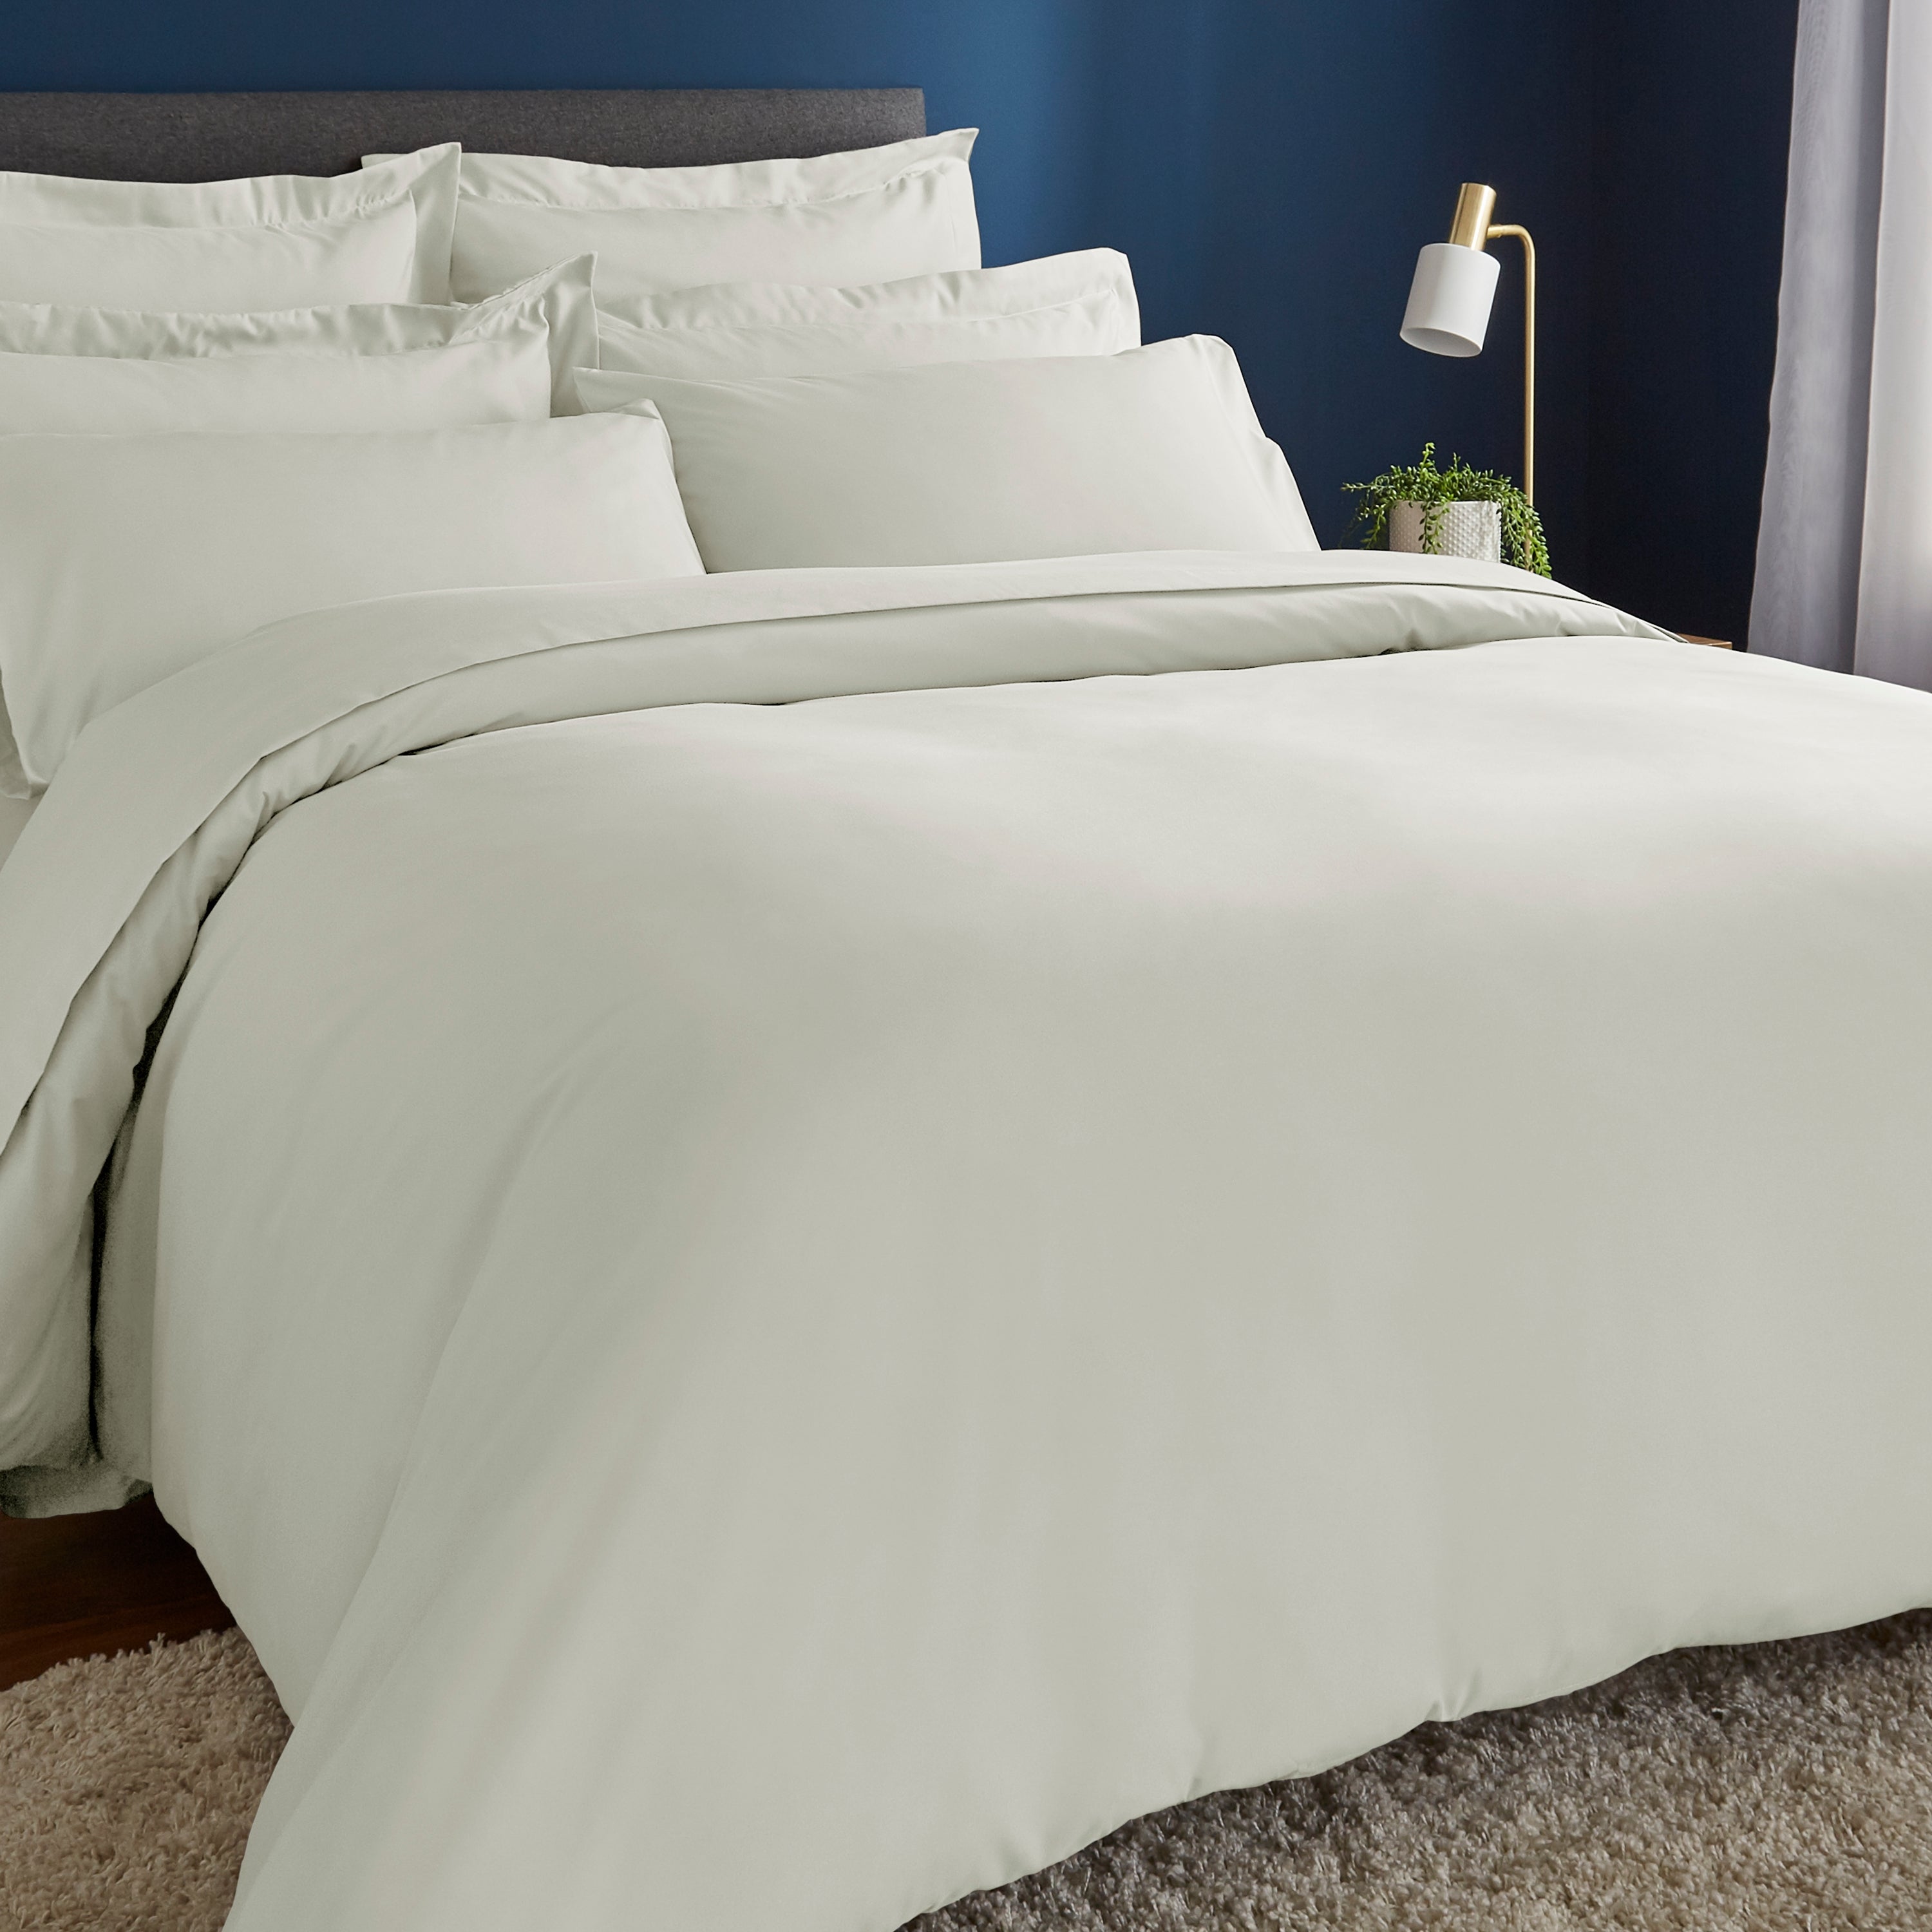 Image of Fogarty Soft Touch Natural Duvet Cover and Pillowcase Set Cream